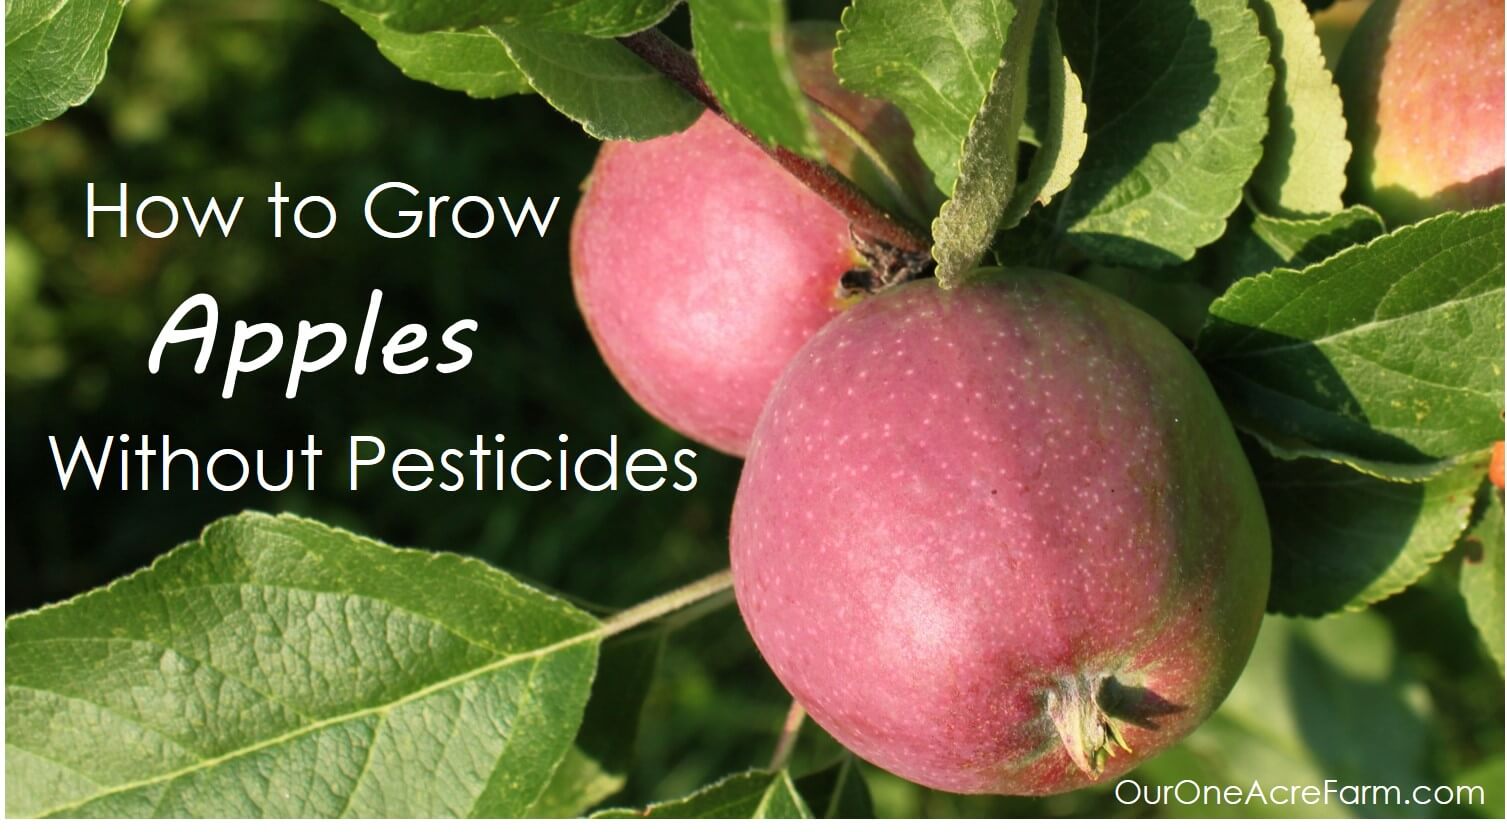 Learn how to grow apples without pesticides! Plant trees in either spring or fall. Explains how to: choose disease resistant varieties, use permaculture techniques like guilding, prune branches and thin flowers, bag young fruit to protect from pests, and identify nutrient deficiencies.